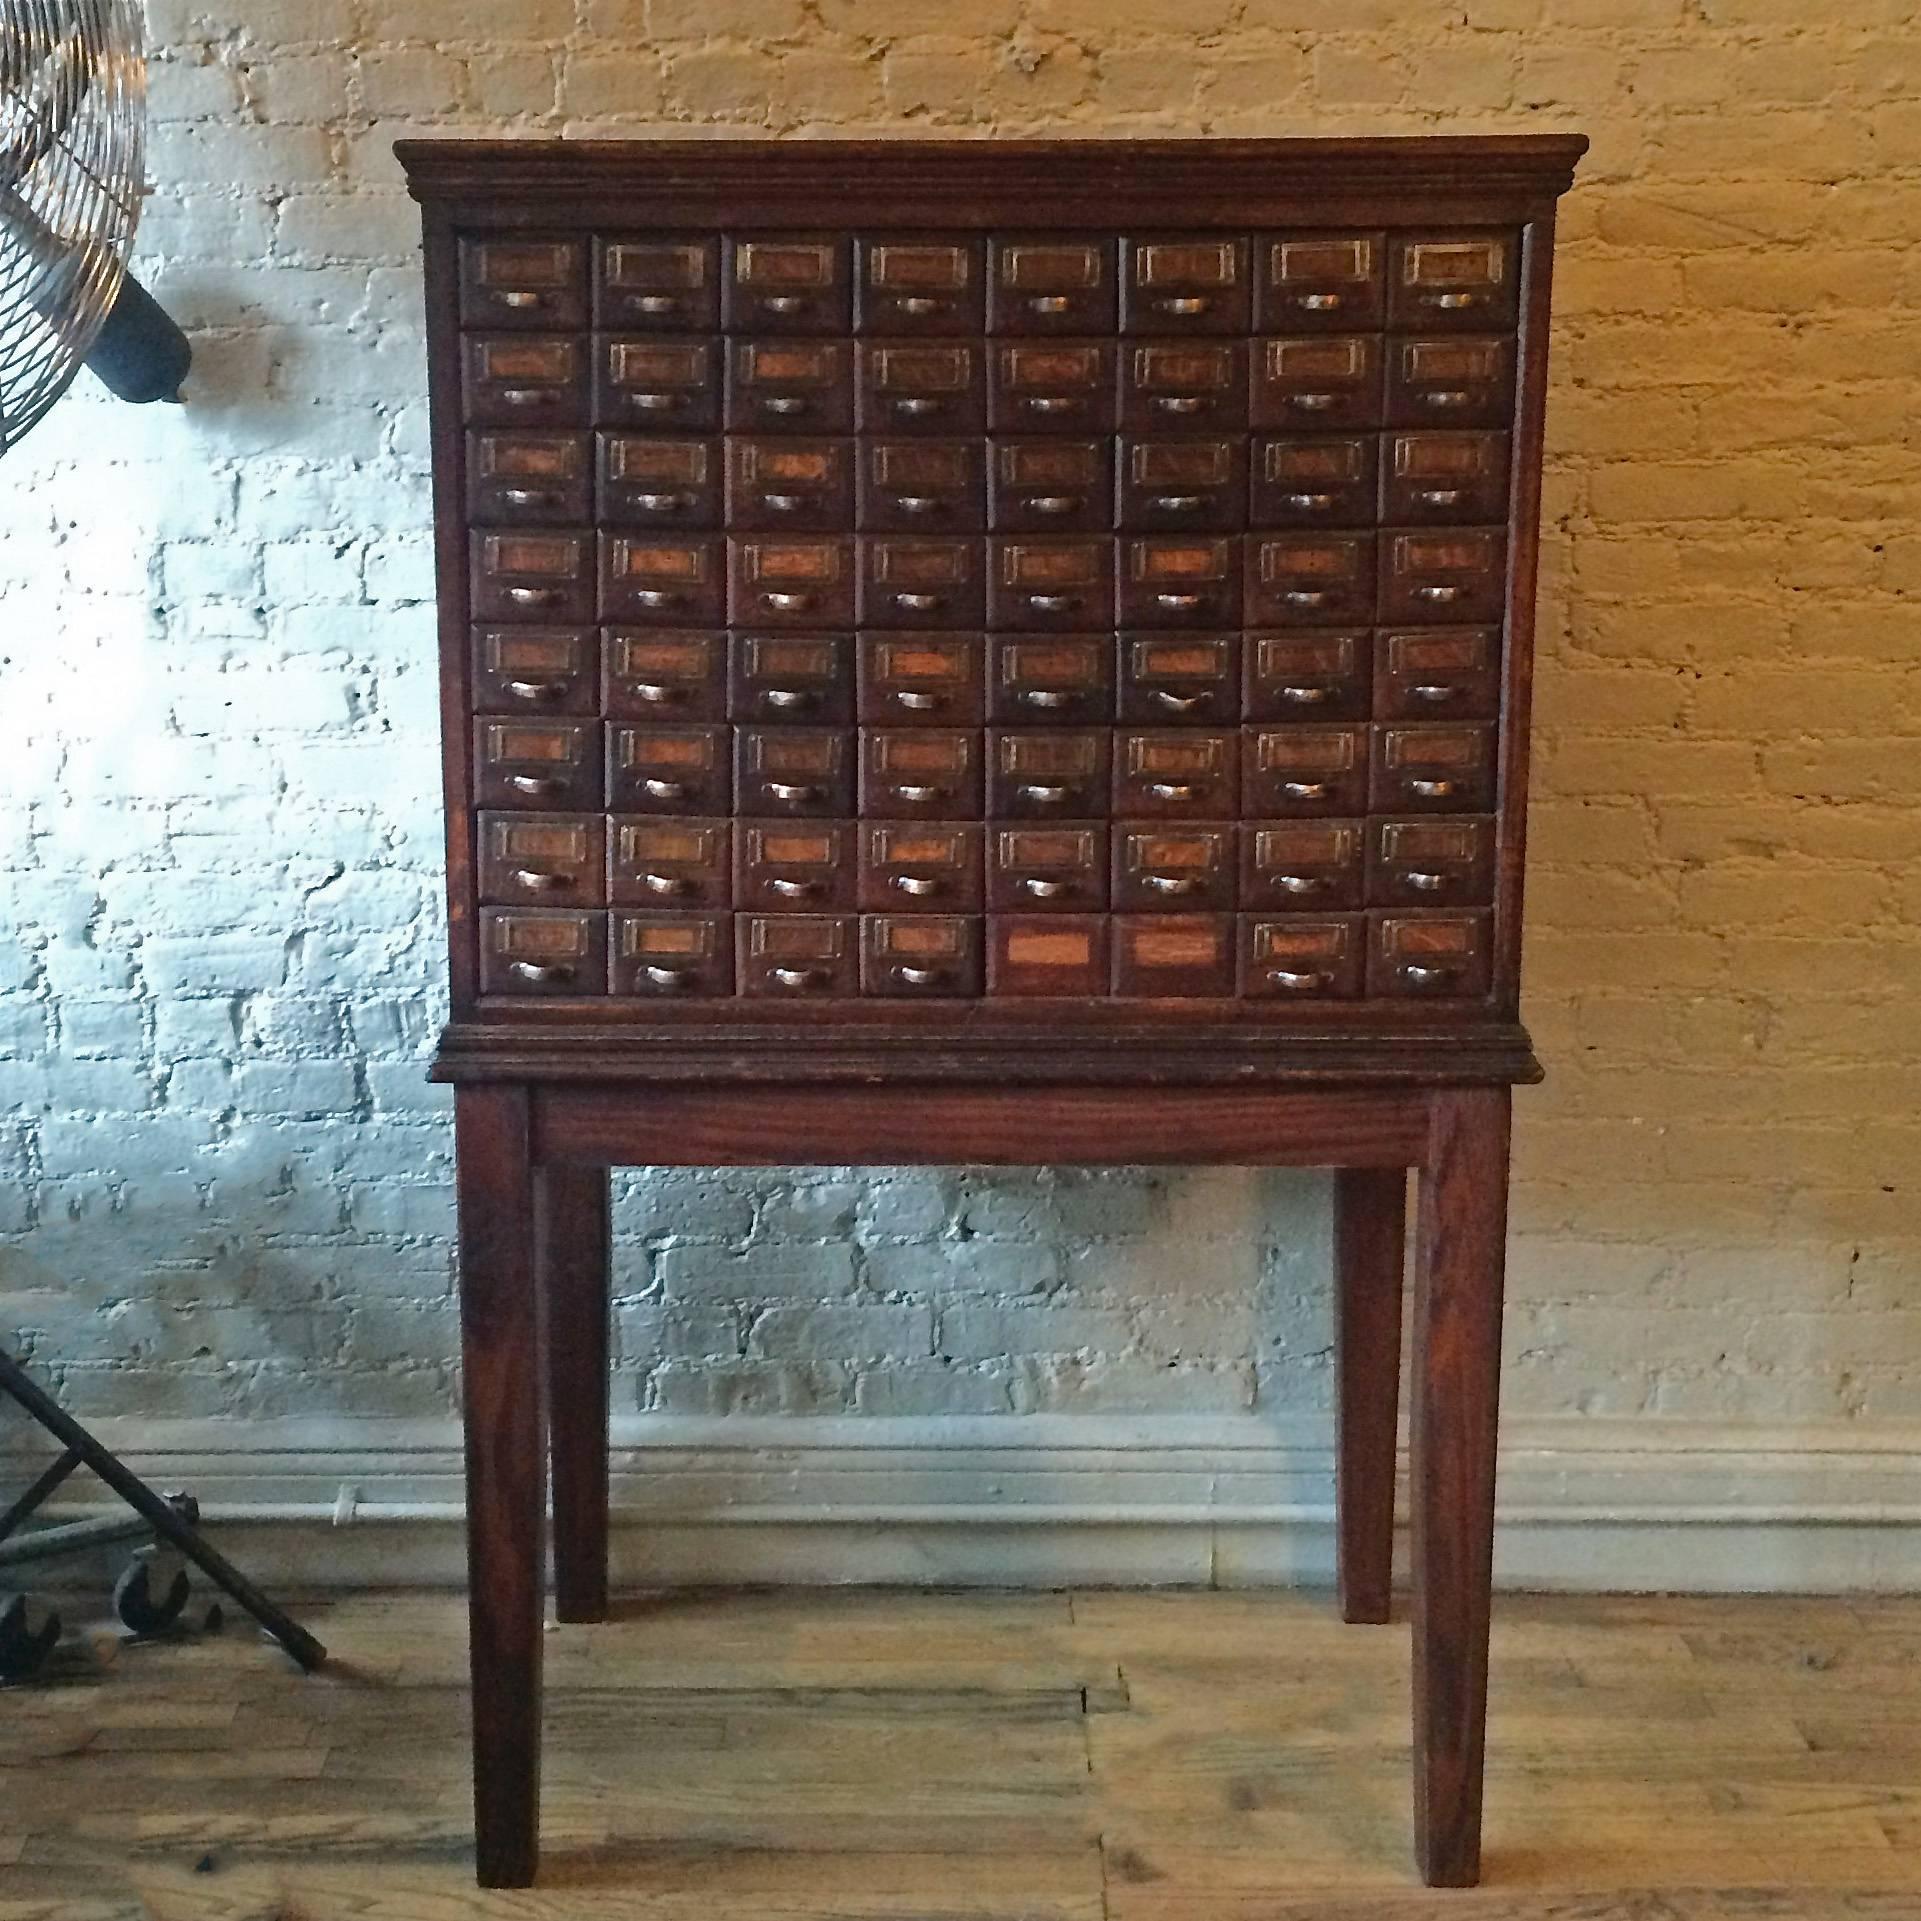 Handsome, antique, late 19th century, American, oak, apothecary medicine cabinet with 64 small drawers with brass pulls and wainscot side panels is newly restored. We have the original hardware for the bottom 2 drawers that can be replaced.

Cabinet